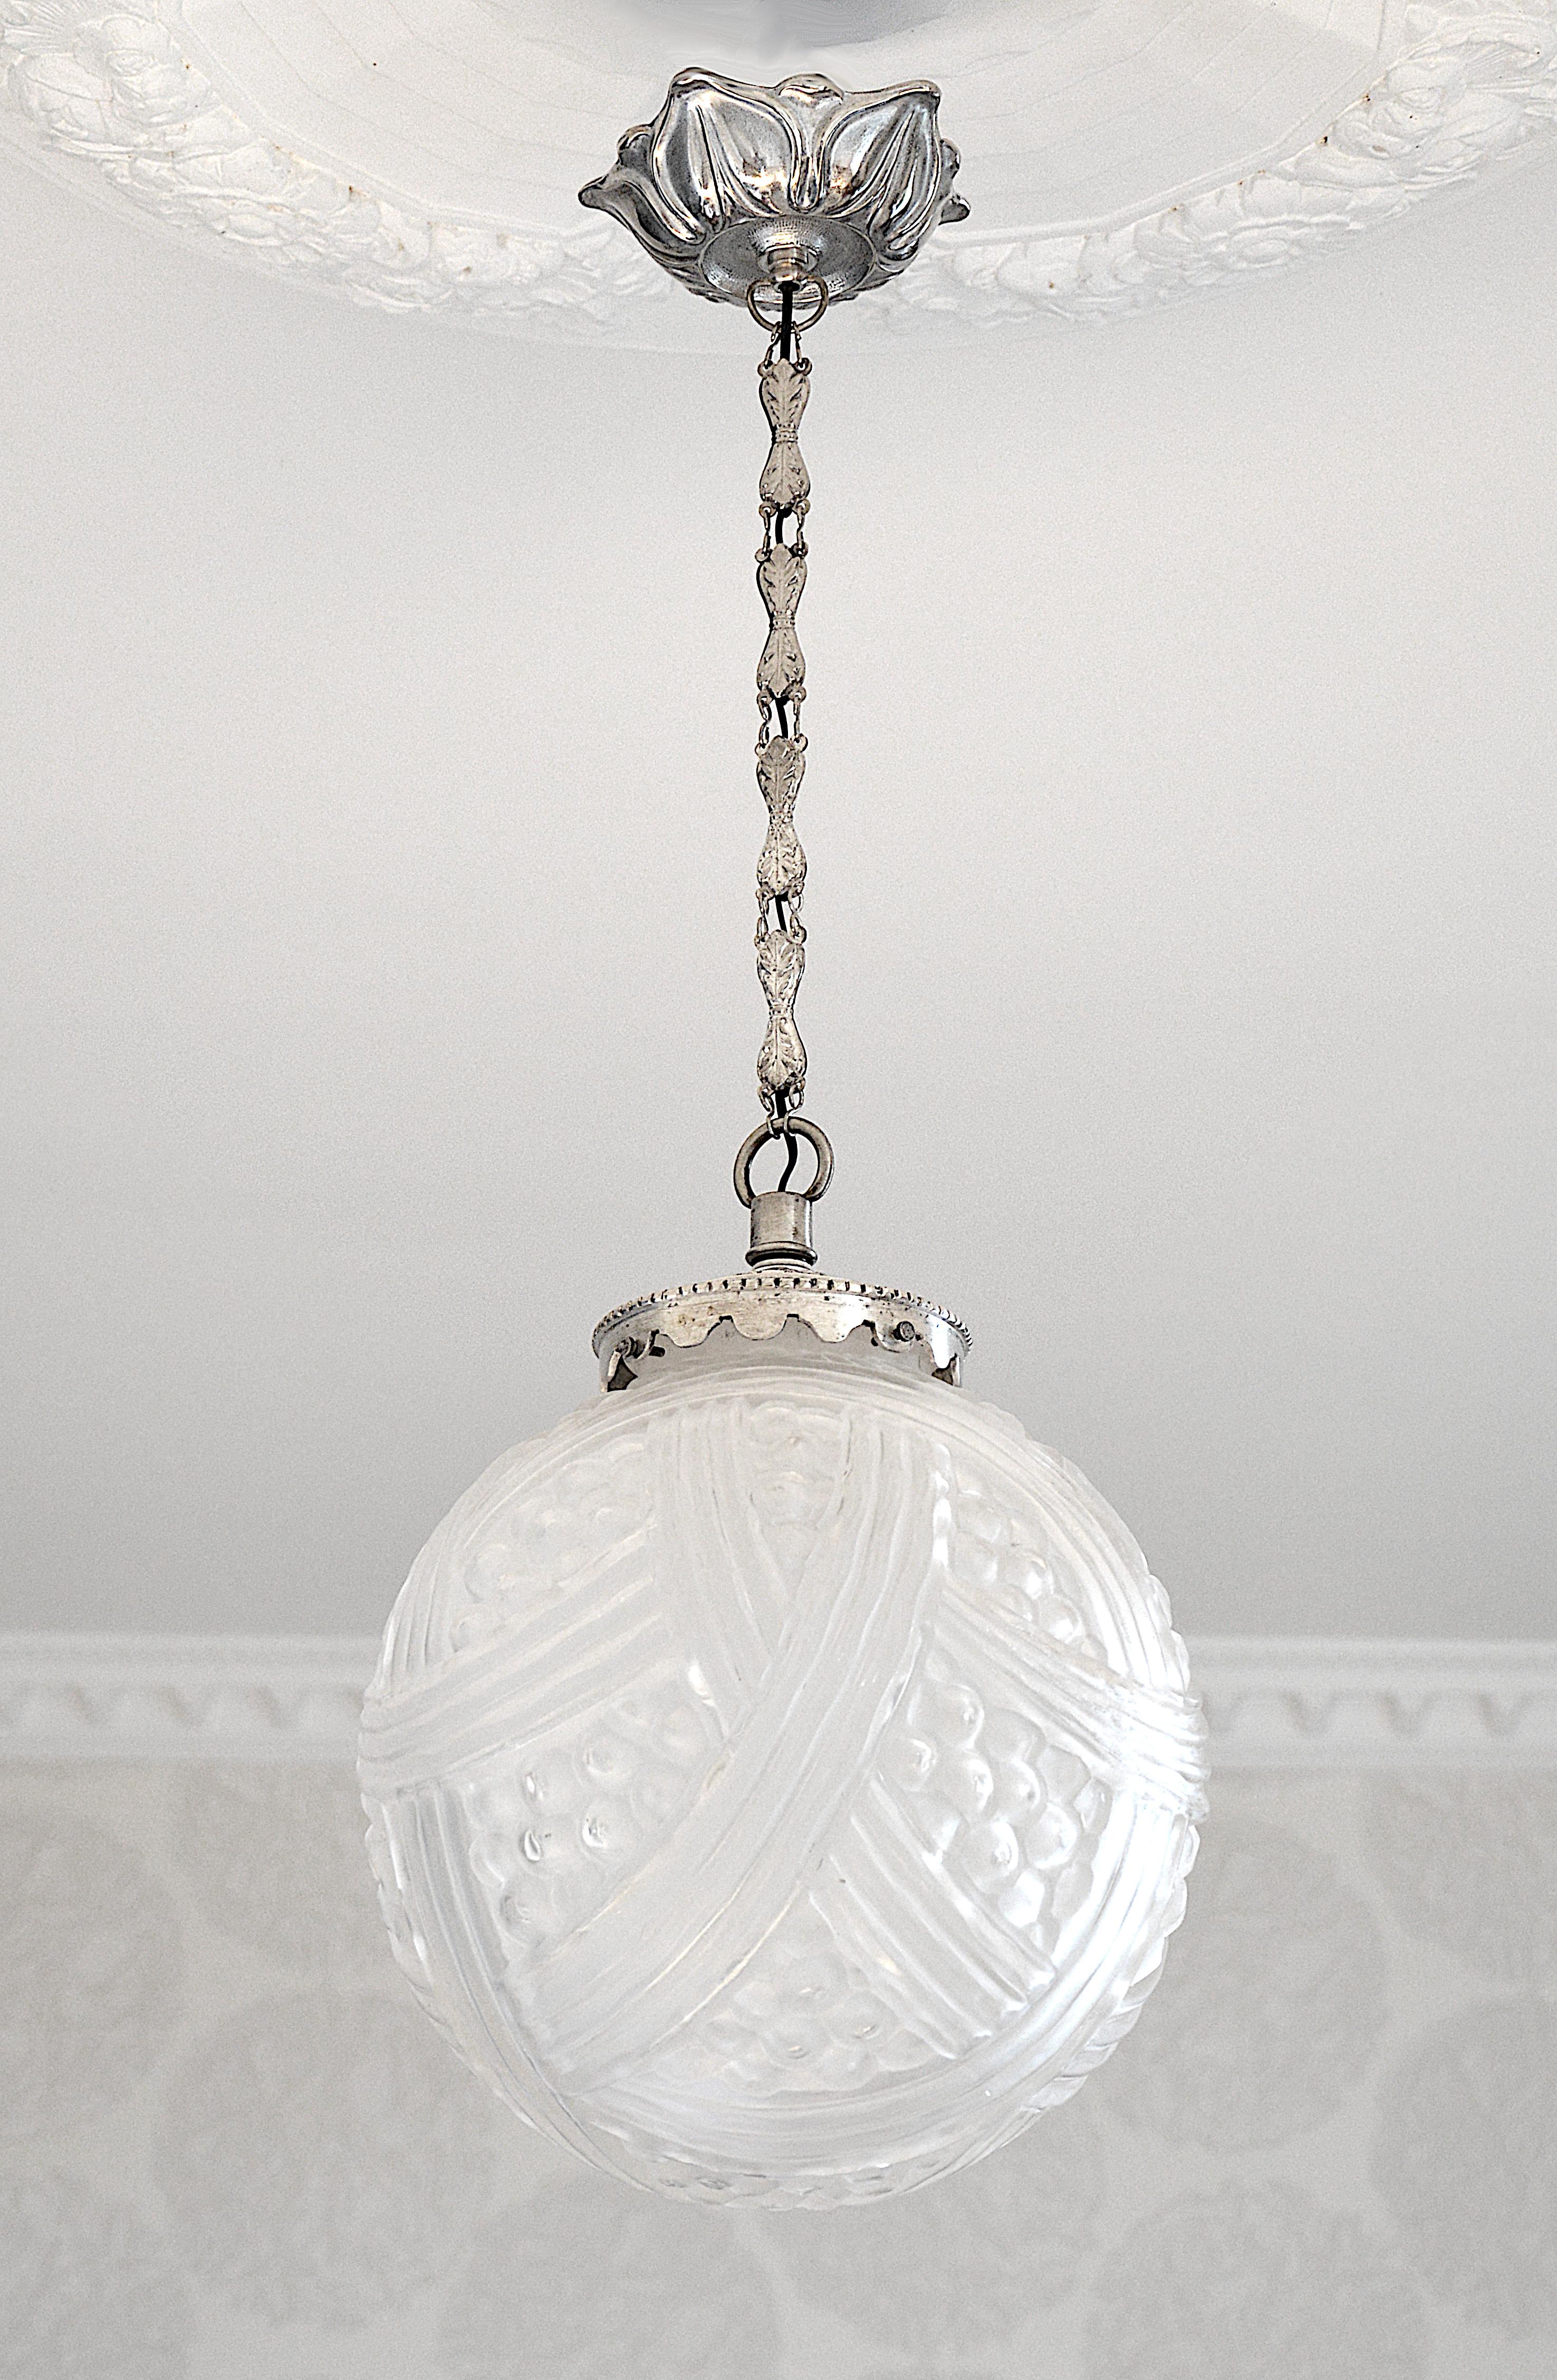 French Art Deco pendant chandelier by Hettier-Vincent, 10 rue de Turenne in Paris, France, 1920s. Glass and brass. Frosted glass lampshade by Des Hanots for Hettier-Vincent. Same period as Rene Lalique, Marius Sabino, Muller freres, Charles